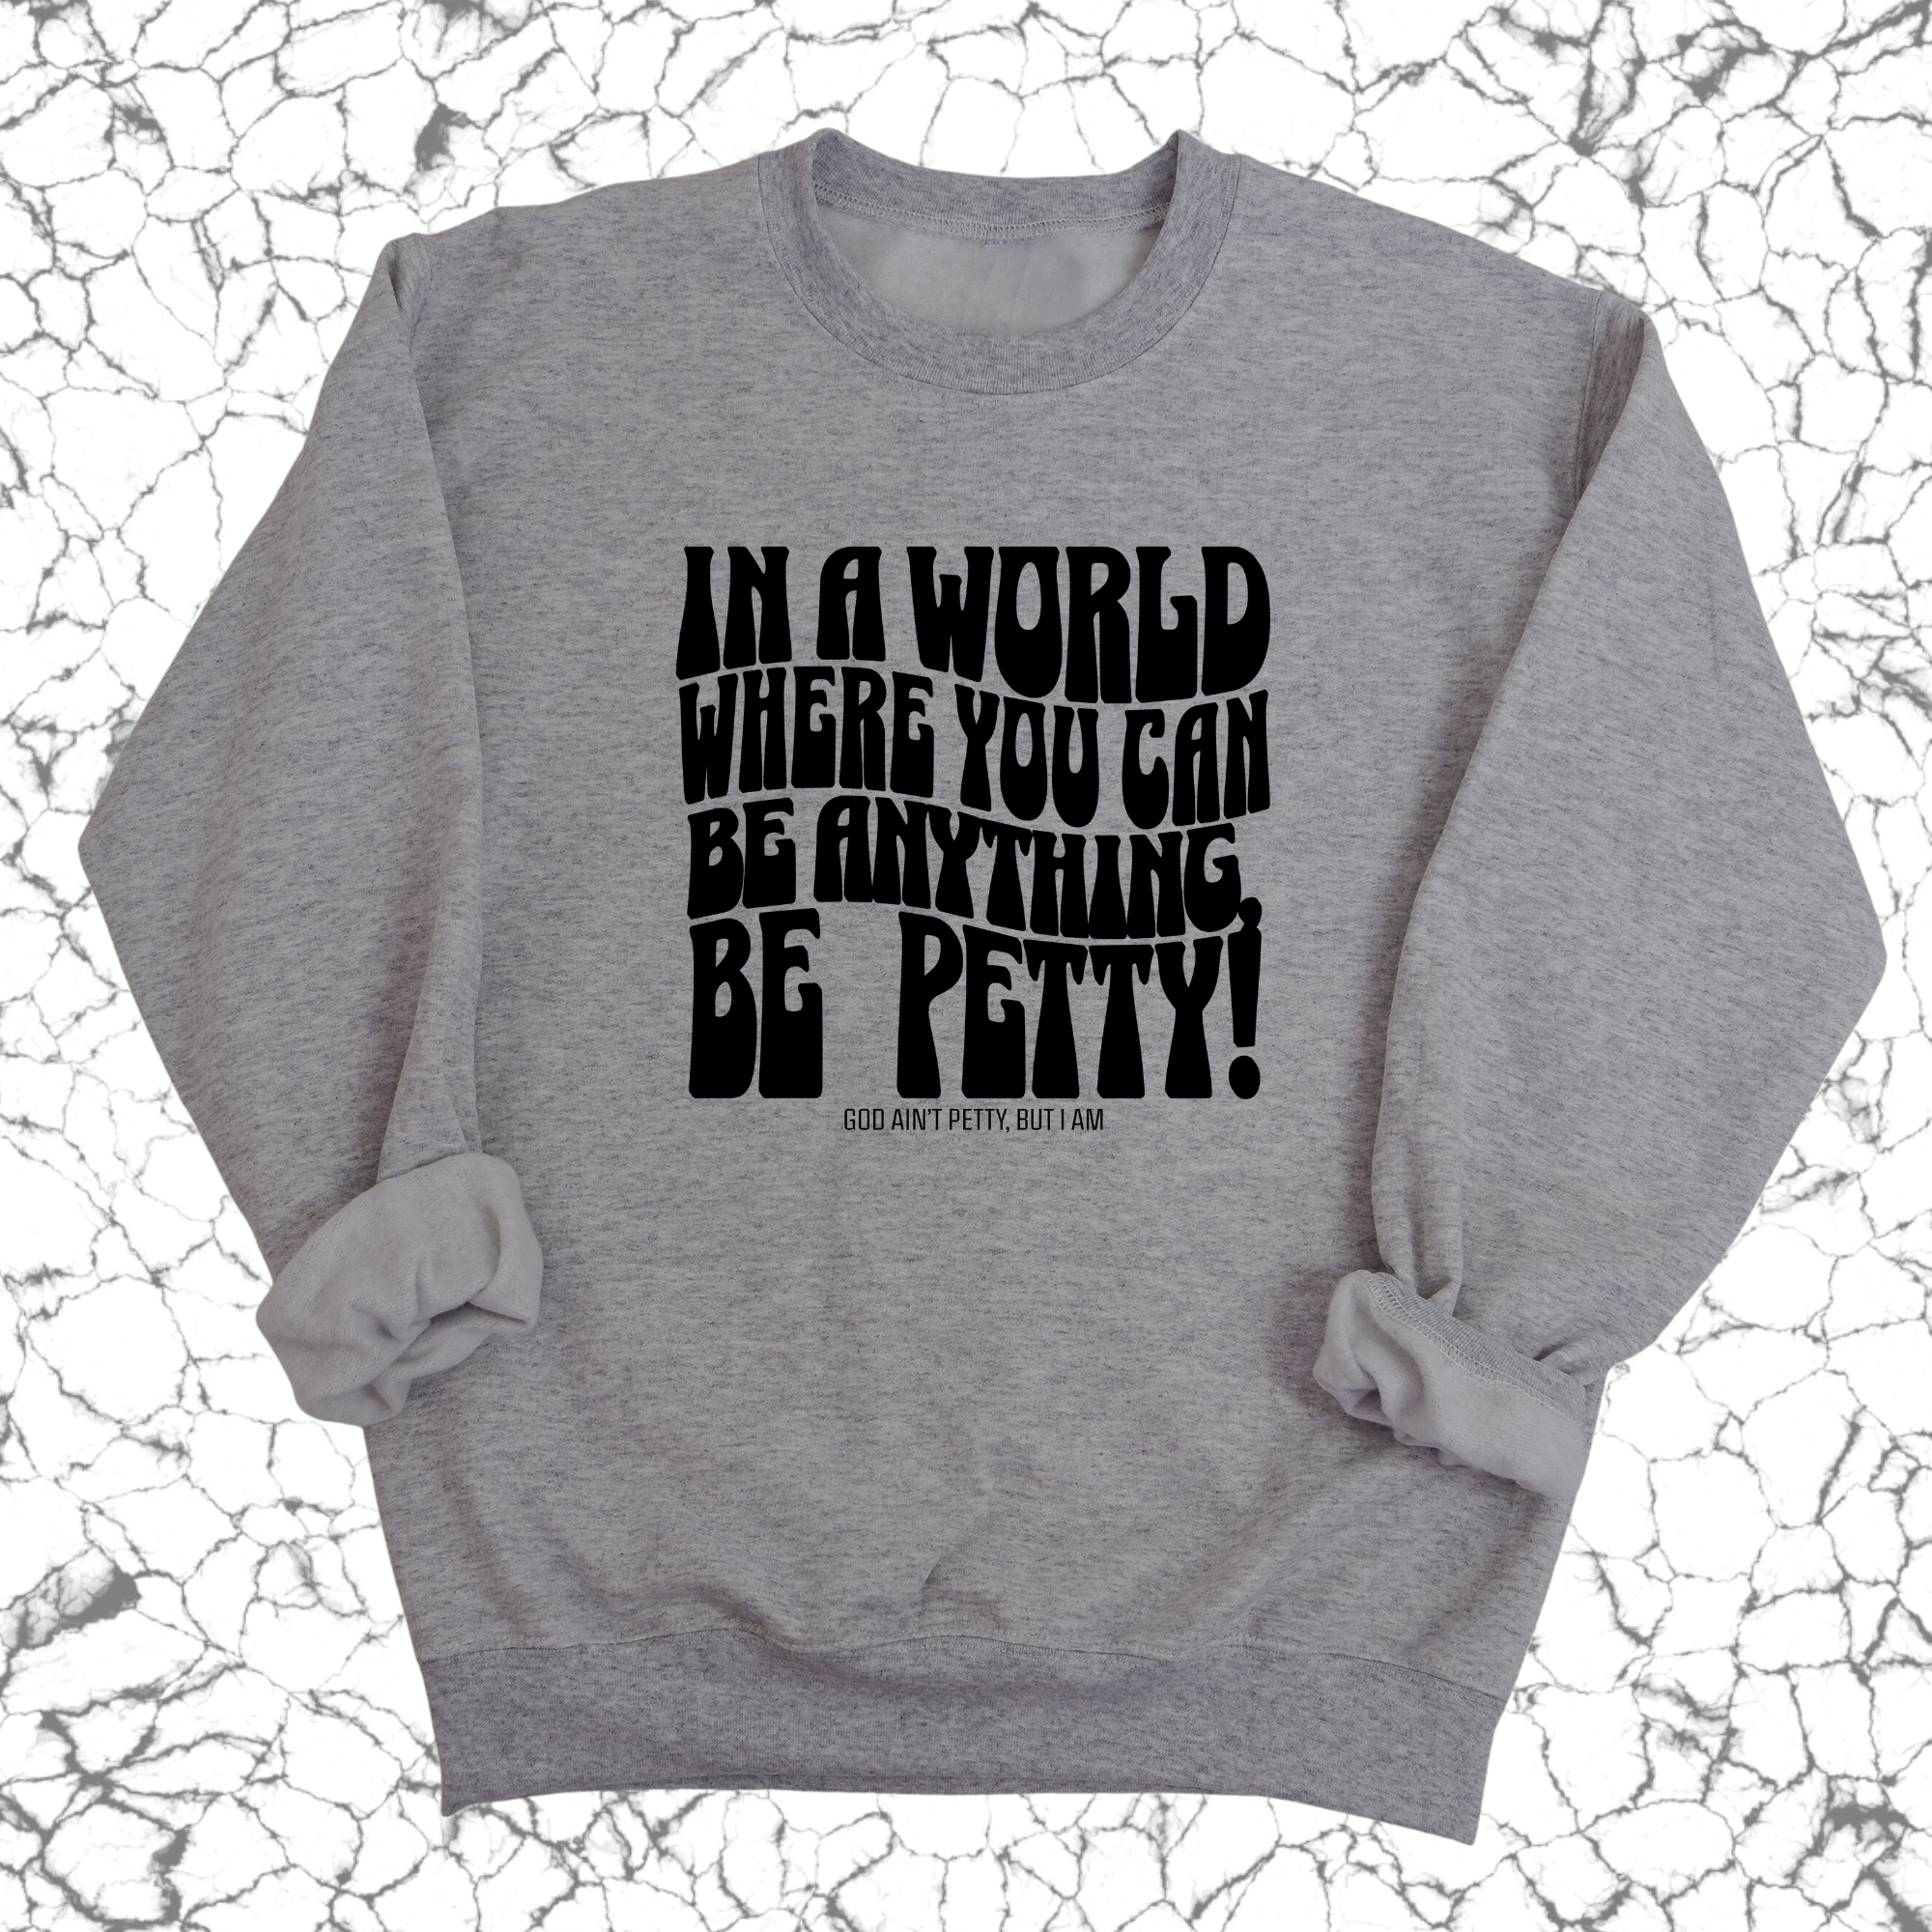 In a world where you can be anything, BE PETTY Unisex Sweatshirt-Sweatshirt-The Original God Ain't Petty But I Am